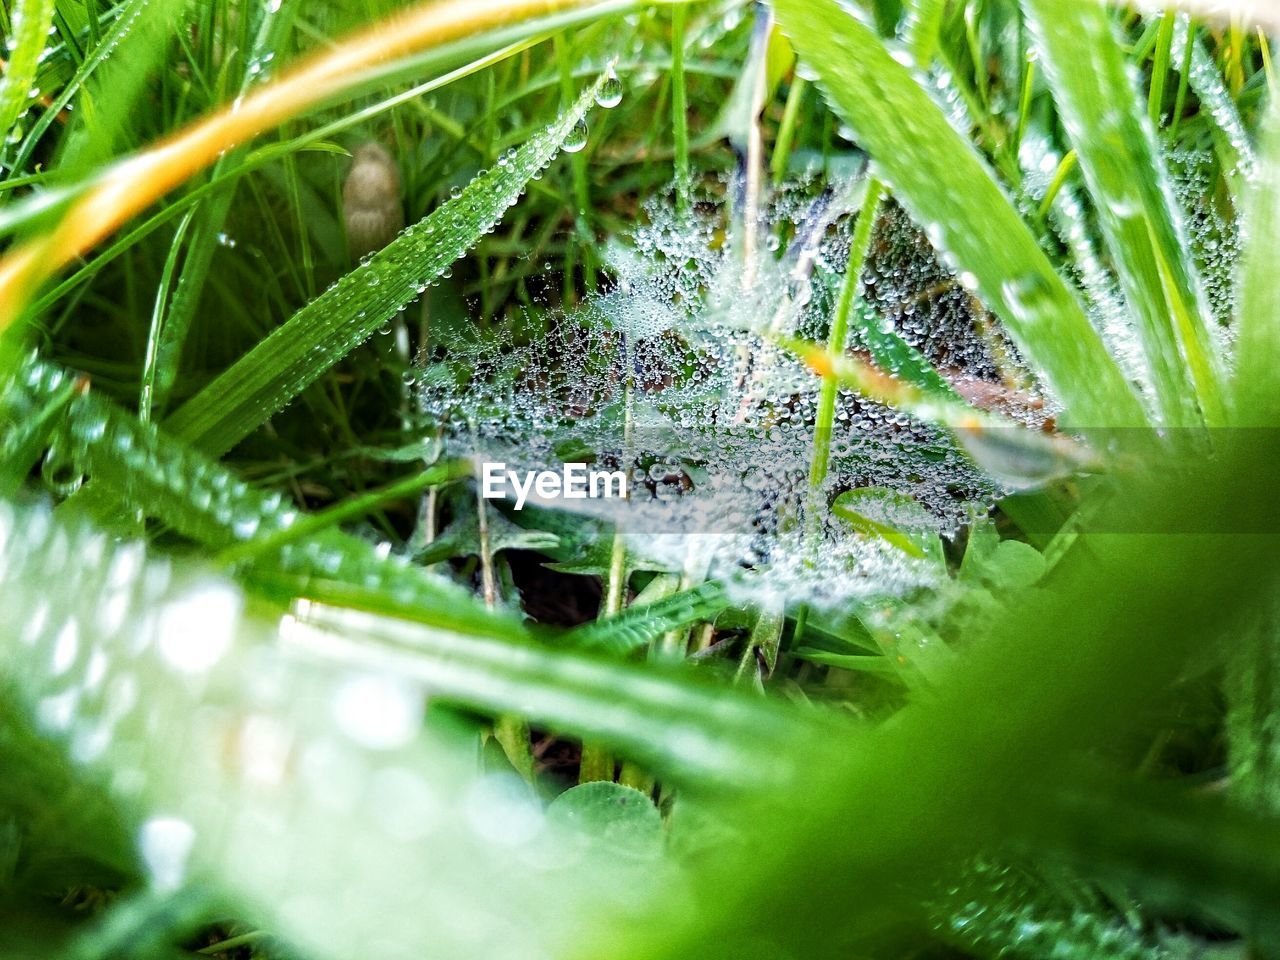 Wet spider web in middle of grass